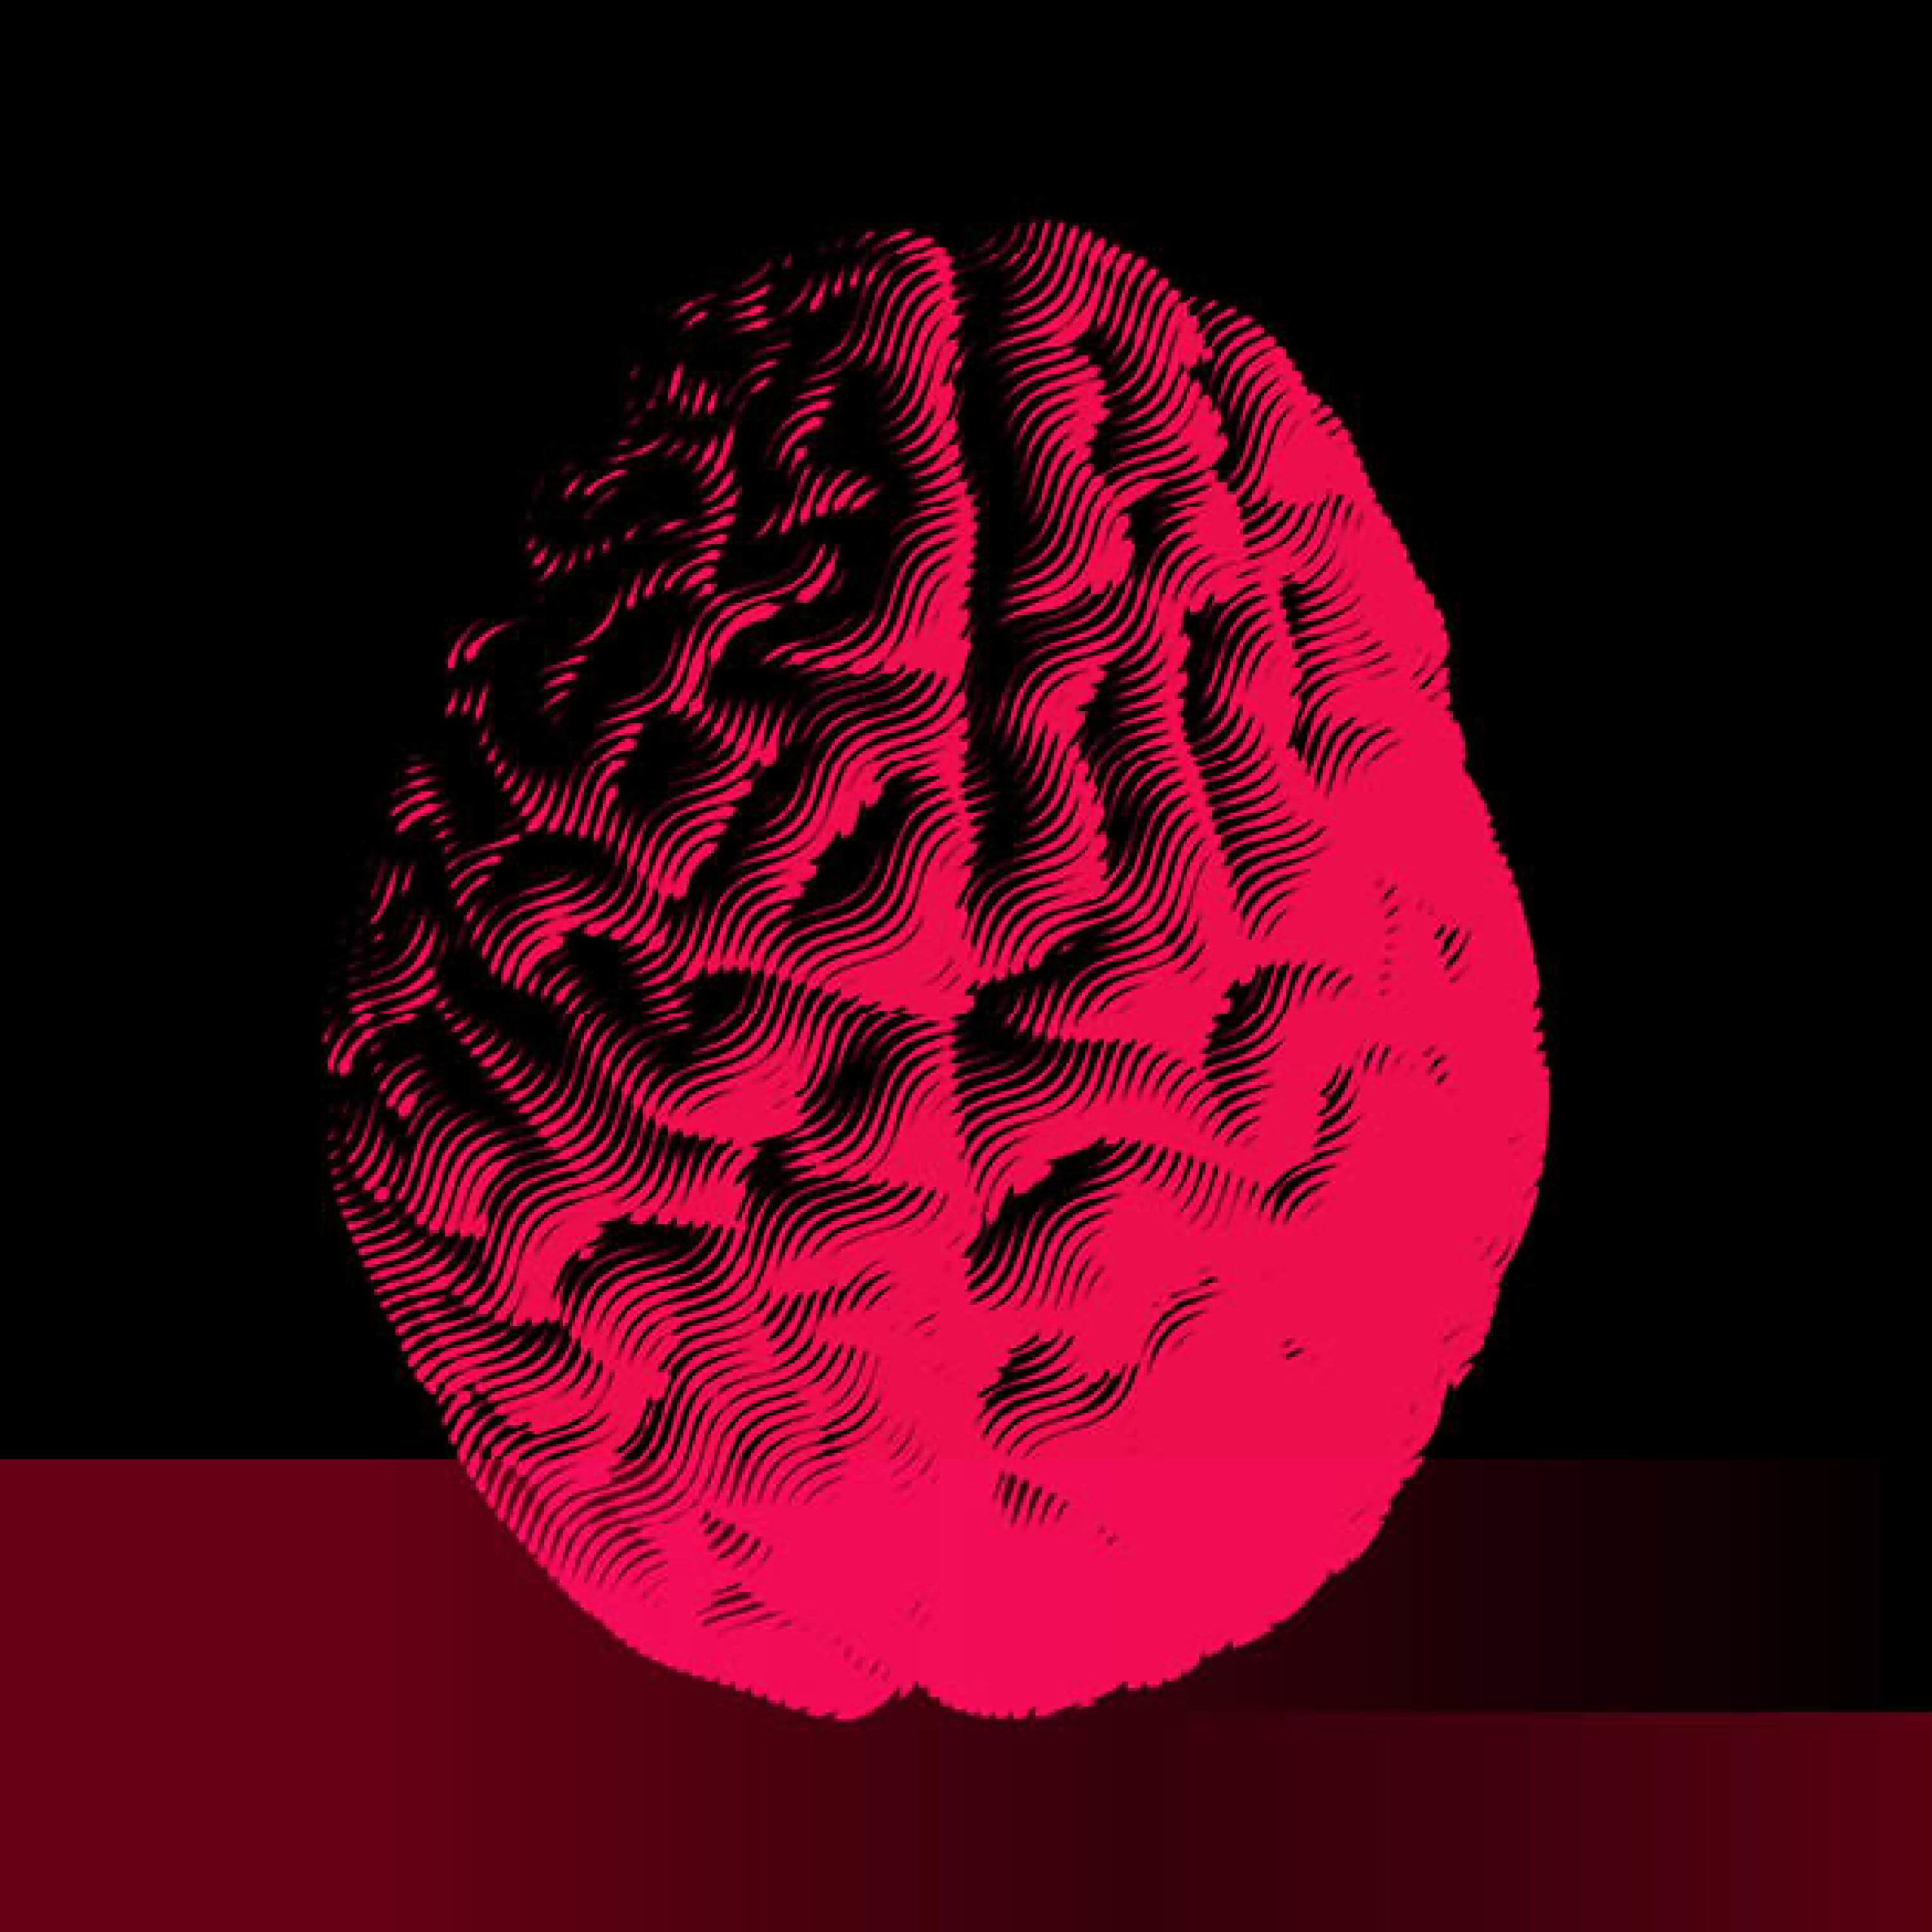 Brain shaded in red and black